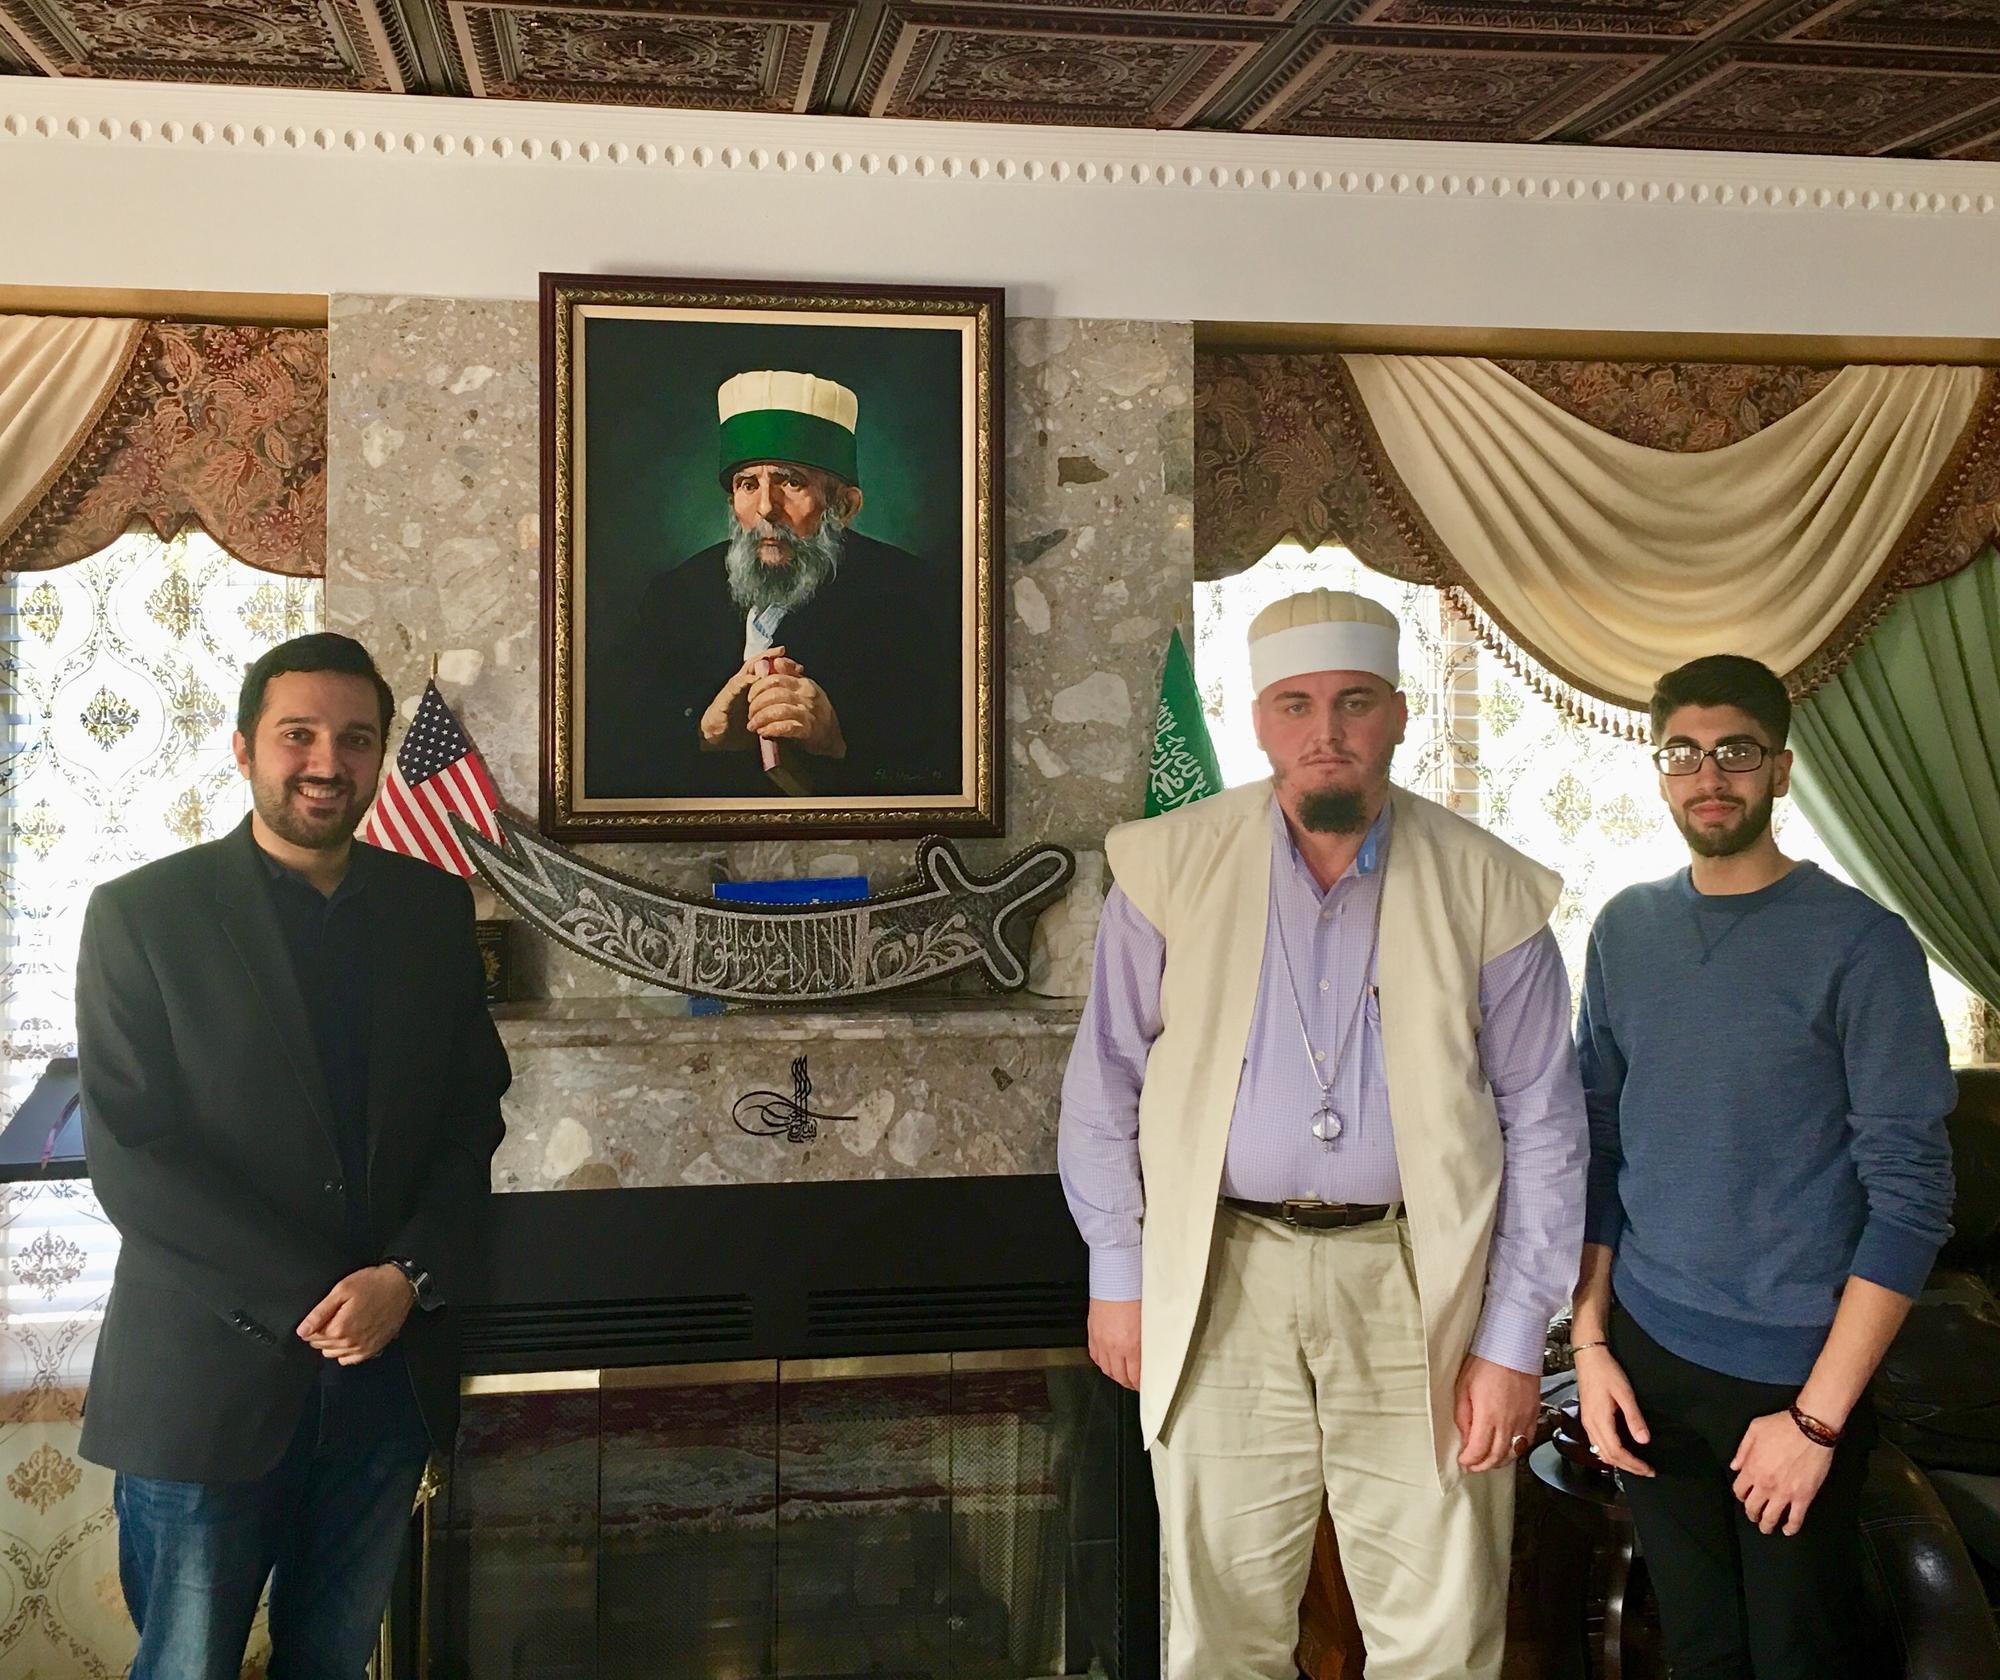 Research Visit and Exchange with the Bektashi Community in Michigan